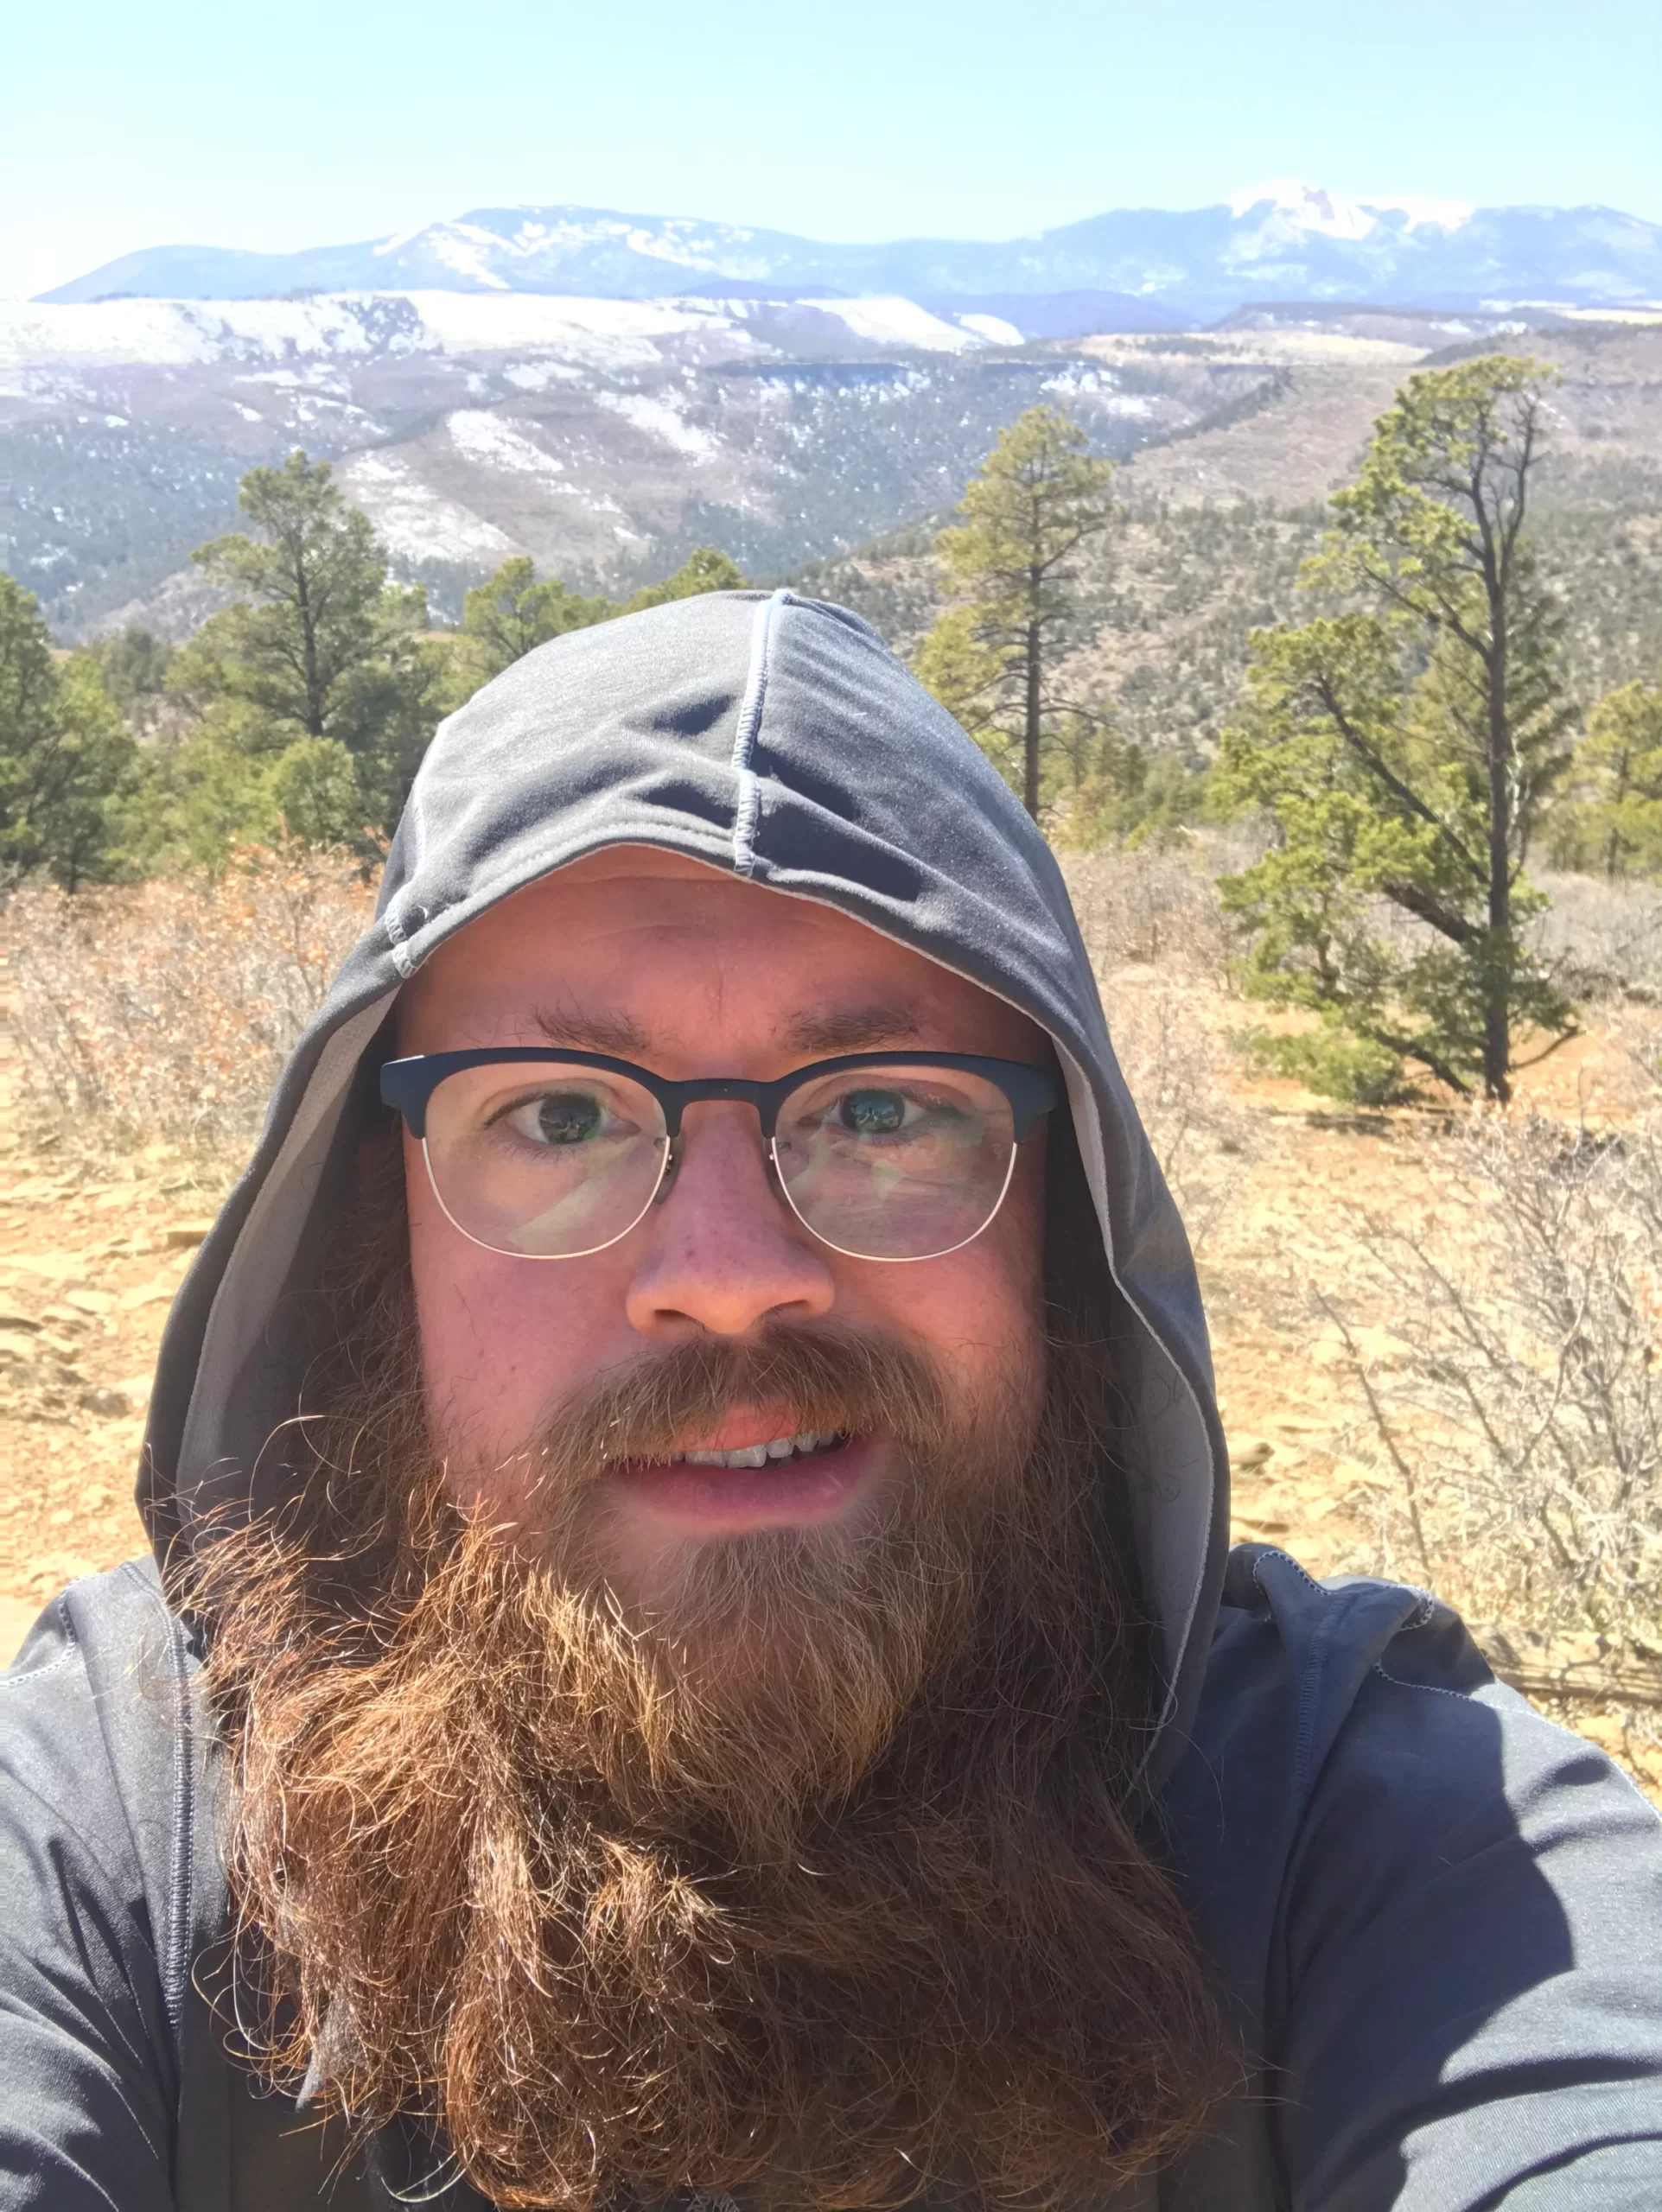 Shane Miller taking a selfie in front of a scenic mountain view